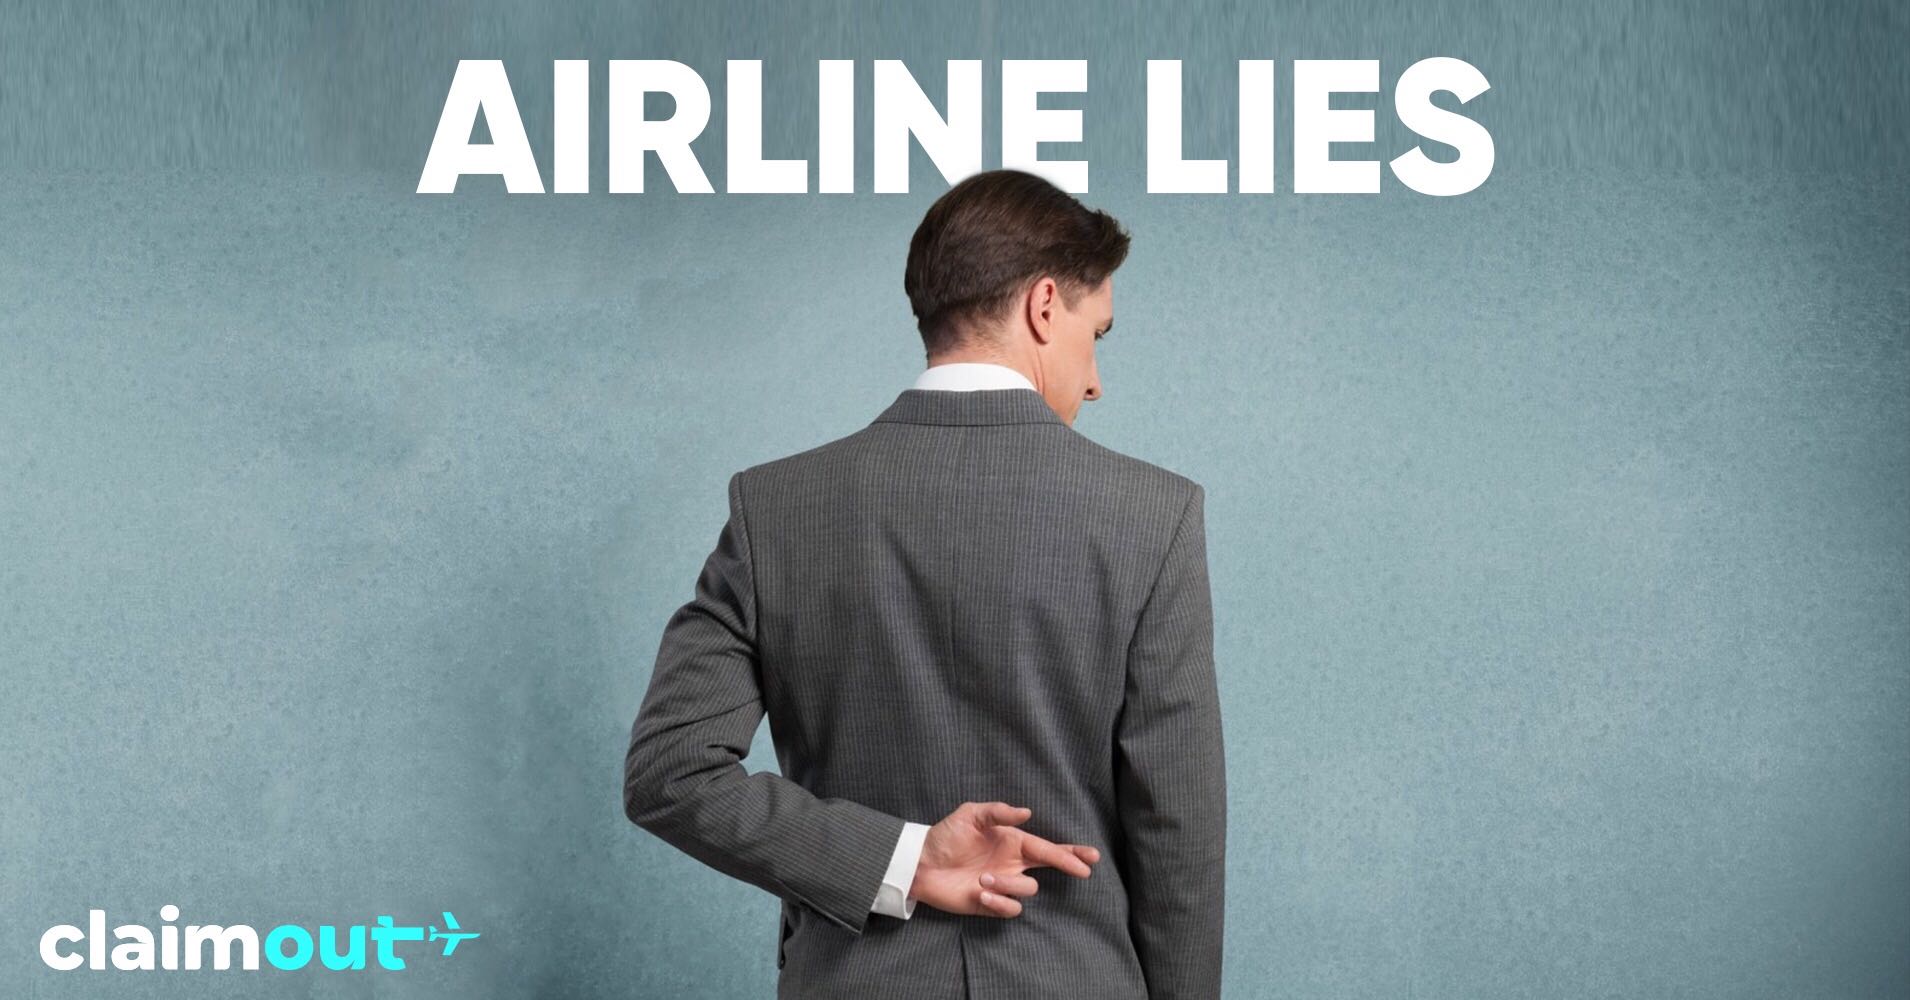 Top 5 Things That Your Airline is Lying About!